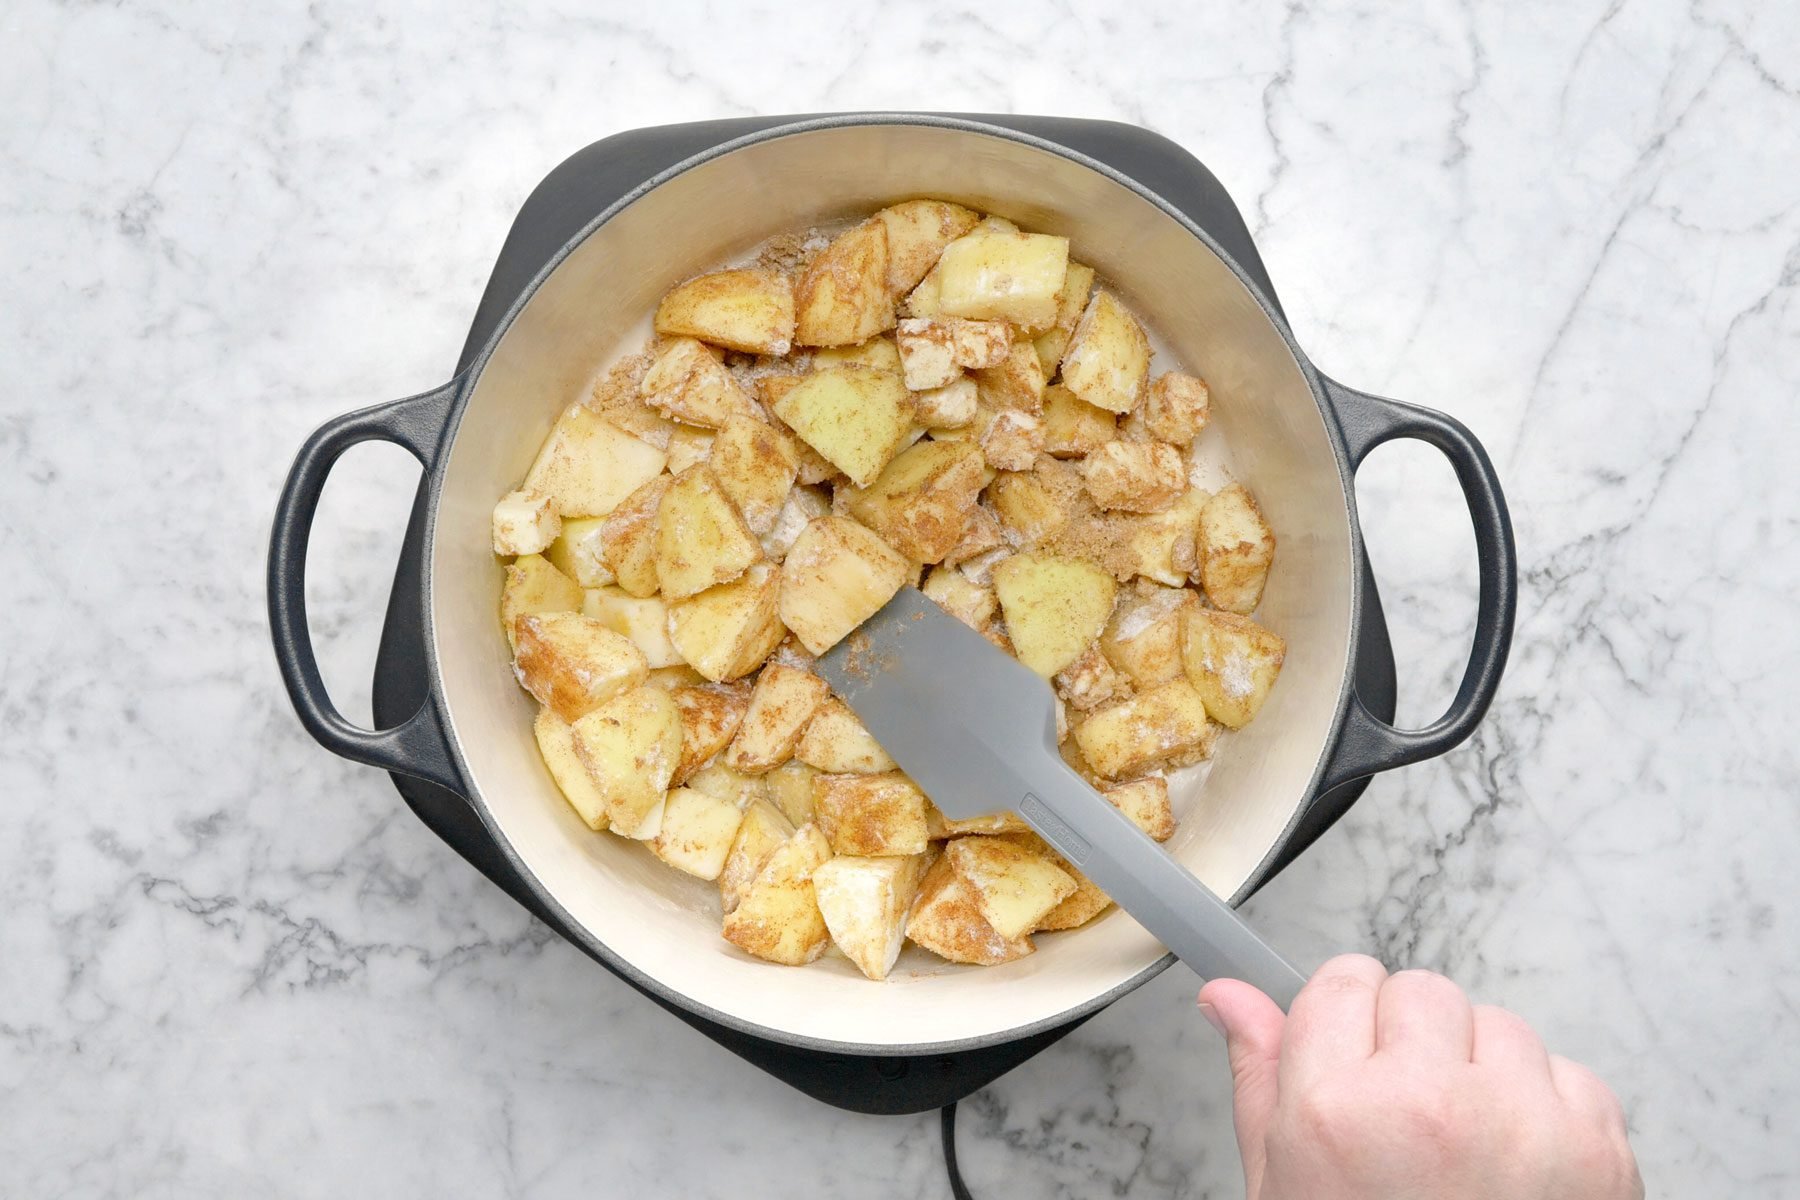 Chunks of apple in a large pot